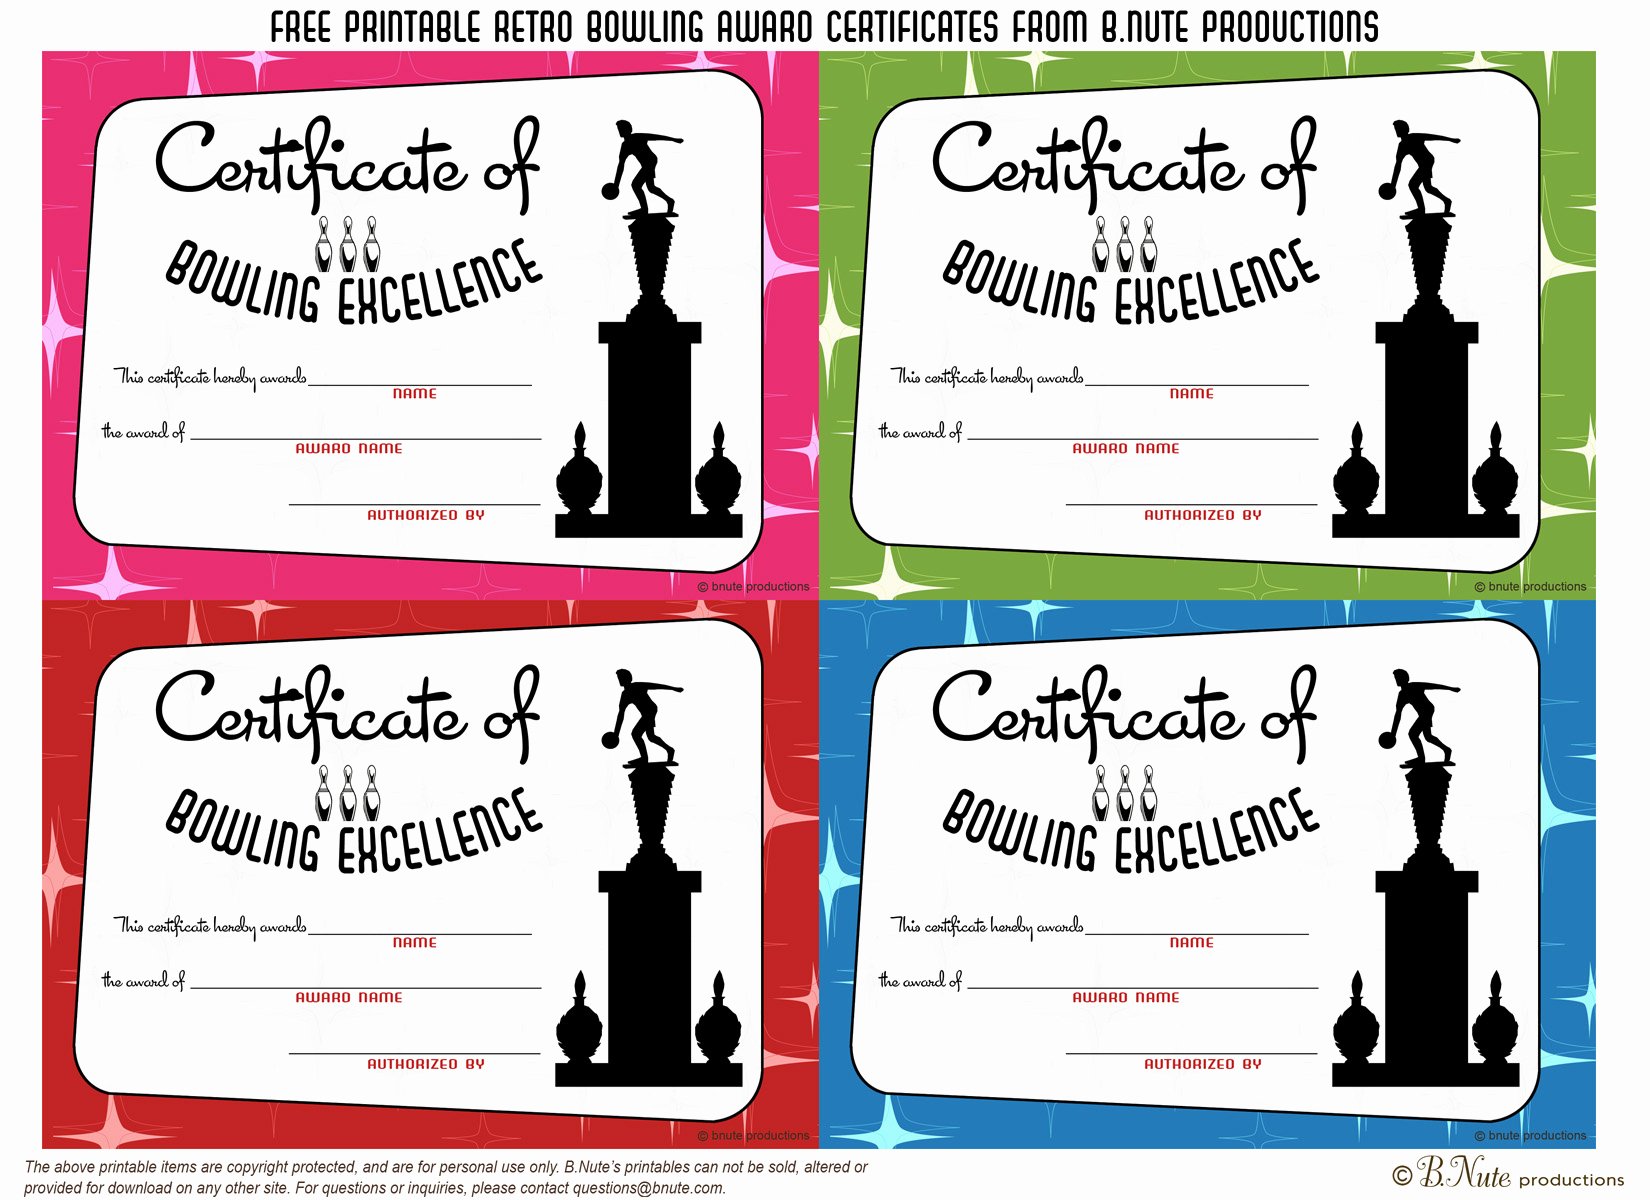 Funny soccer Award Ideas Beautiful Bnute Productions Free Printable Bowling Award Certificates